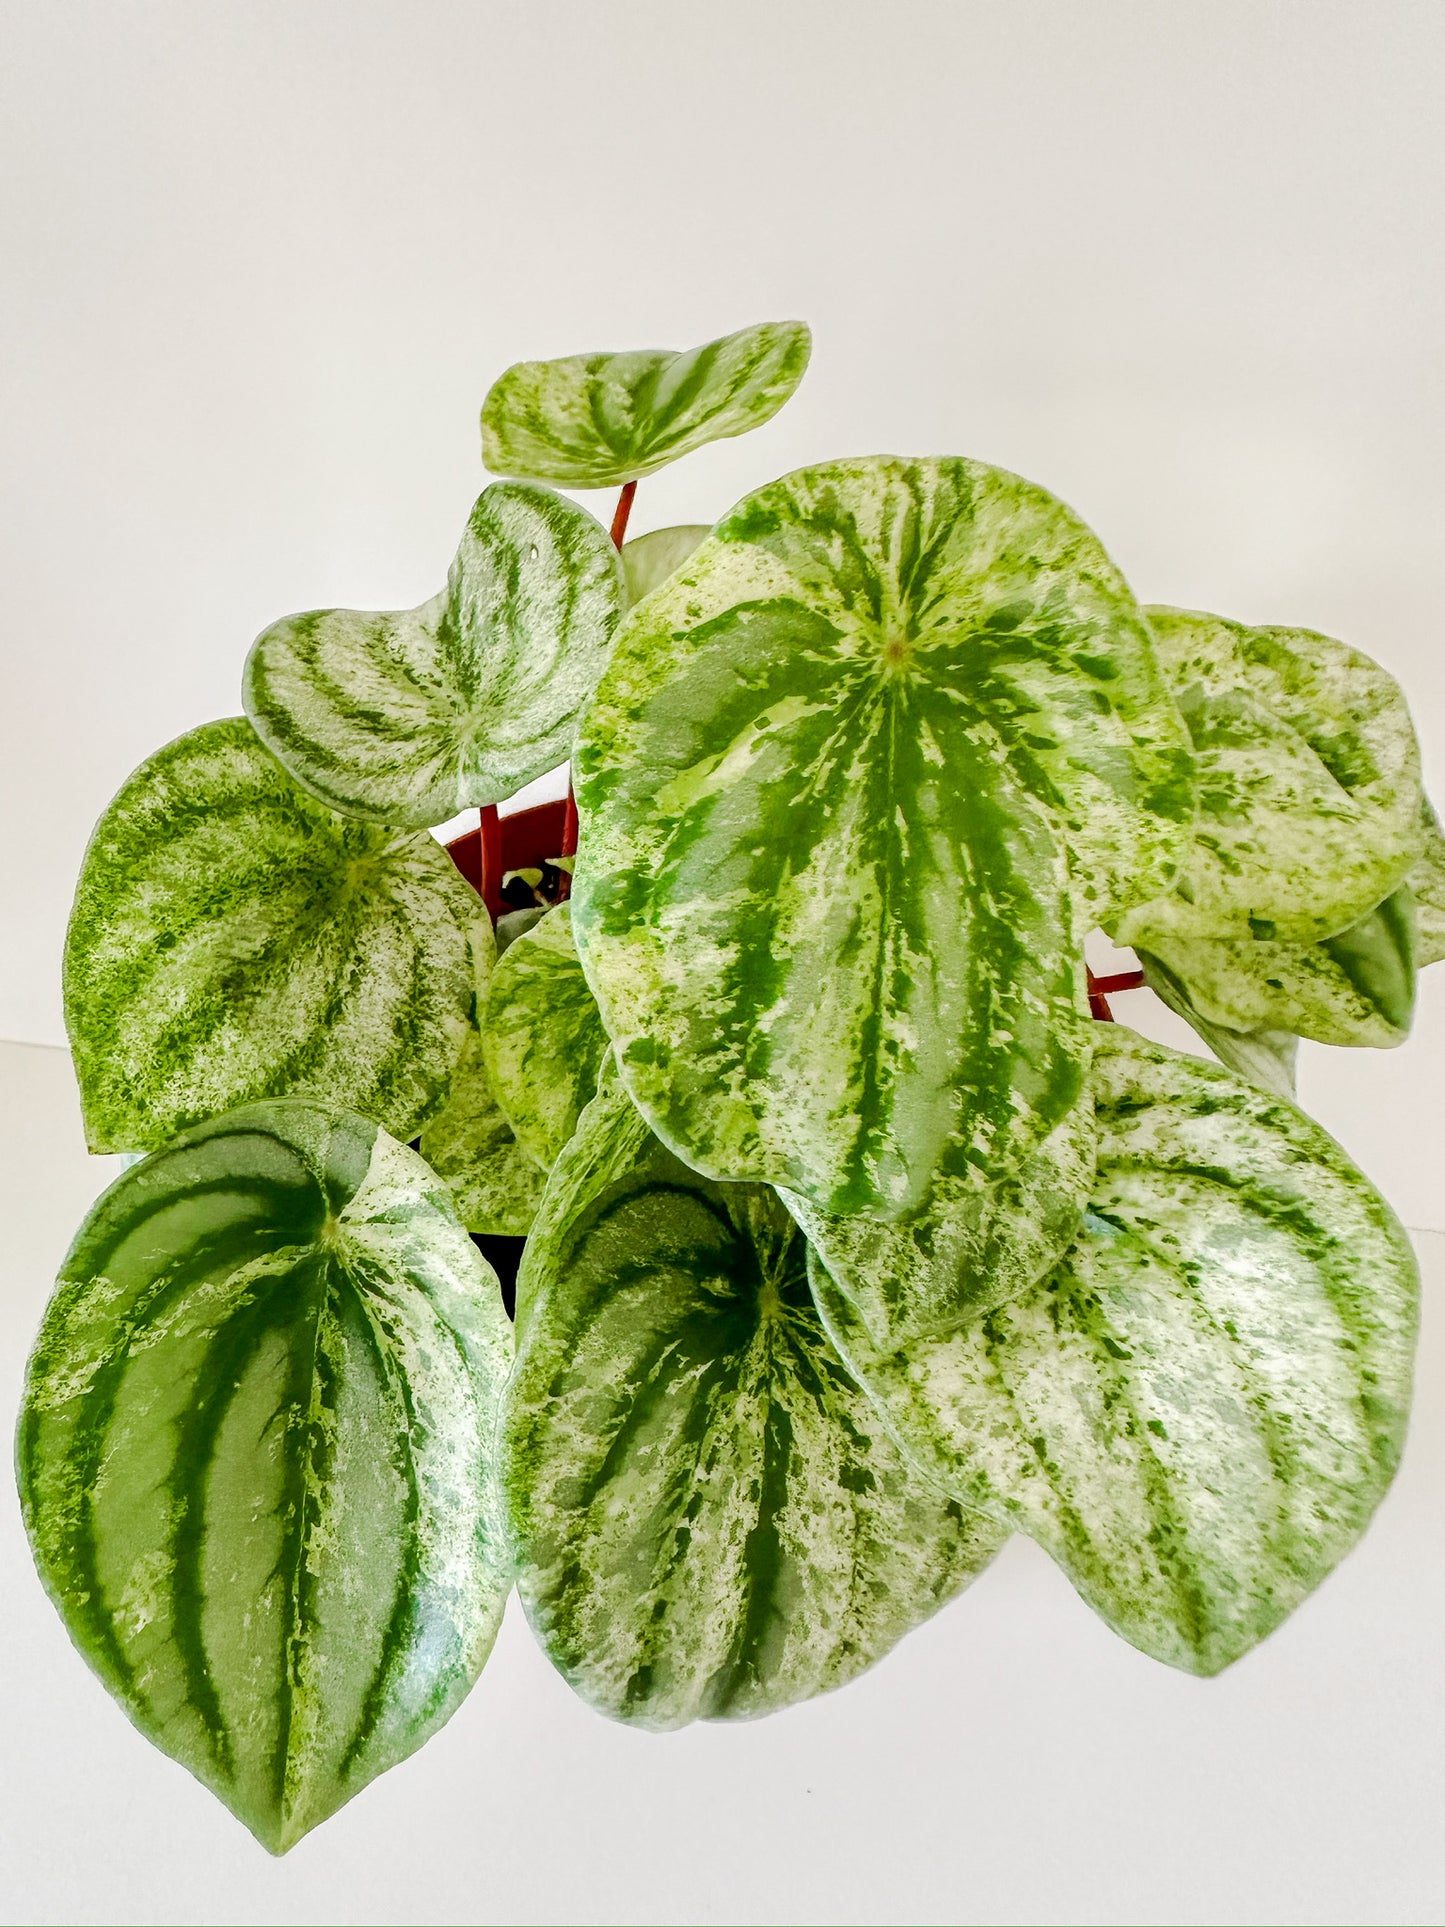 Peperomia 'Watermelon Variegated'- Stunning Watermelon Patterned Leaves With White Cream Speckled & Splashy Variegation- Tropical Houseplant- (6 Inch Nursery Pot)